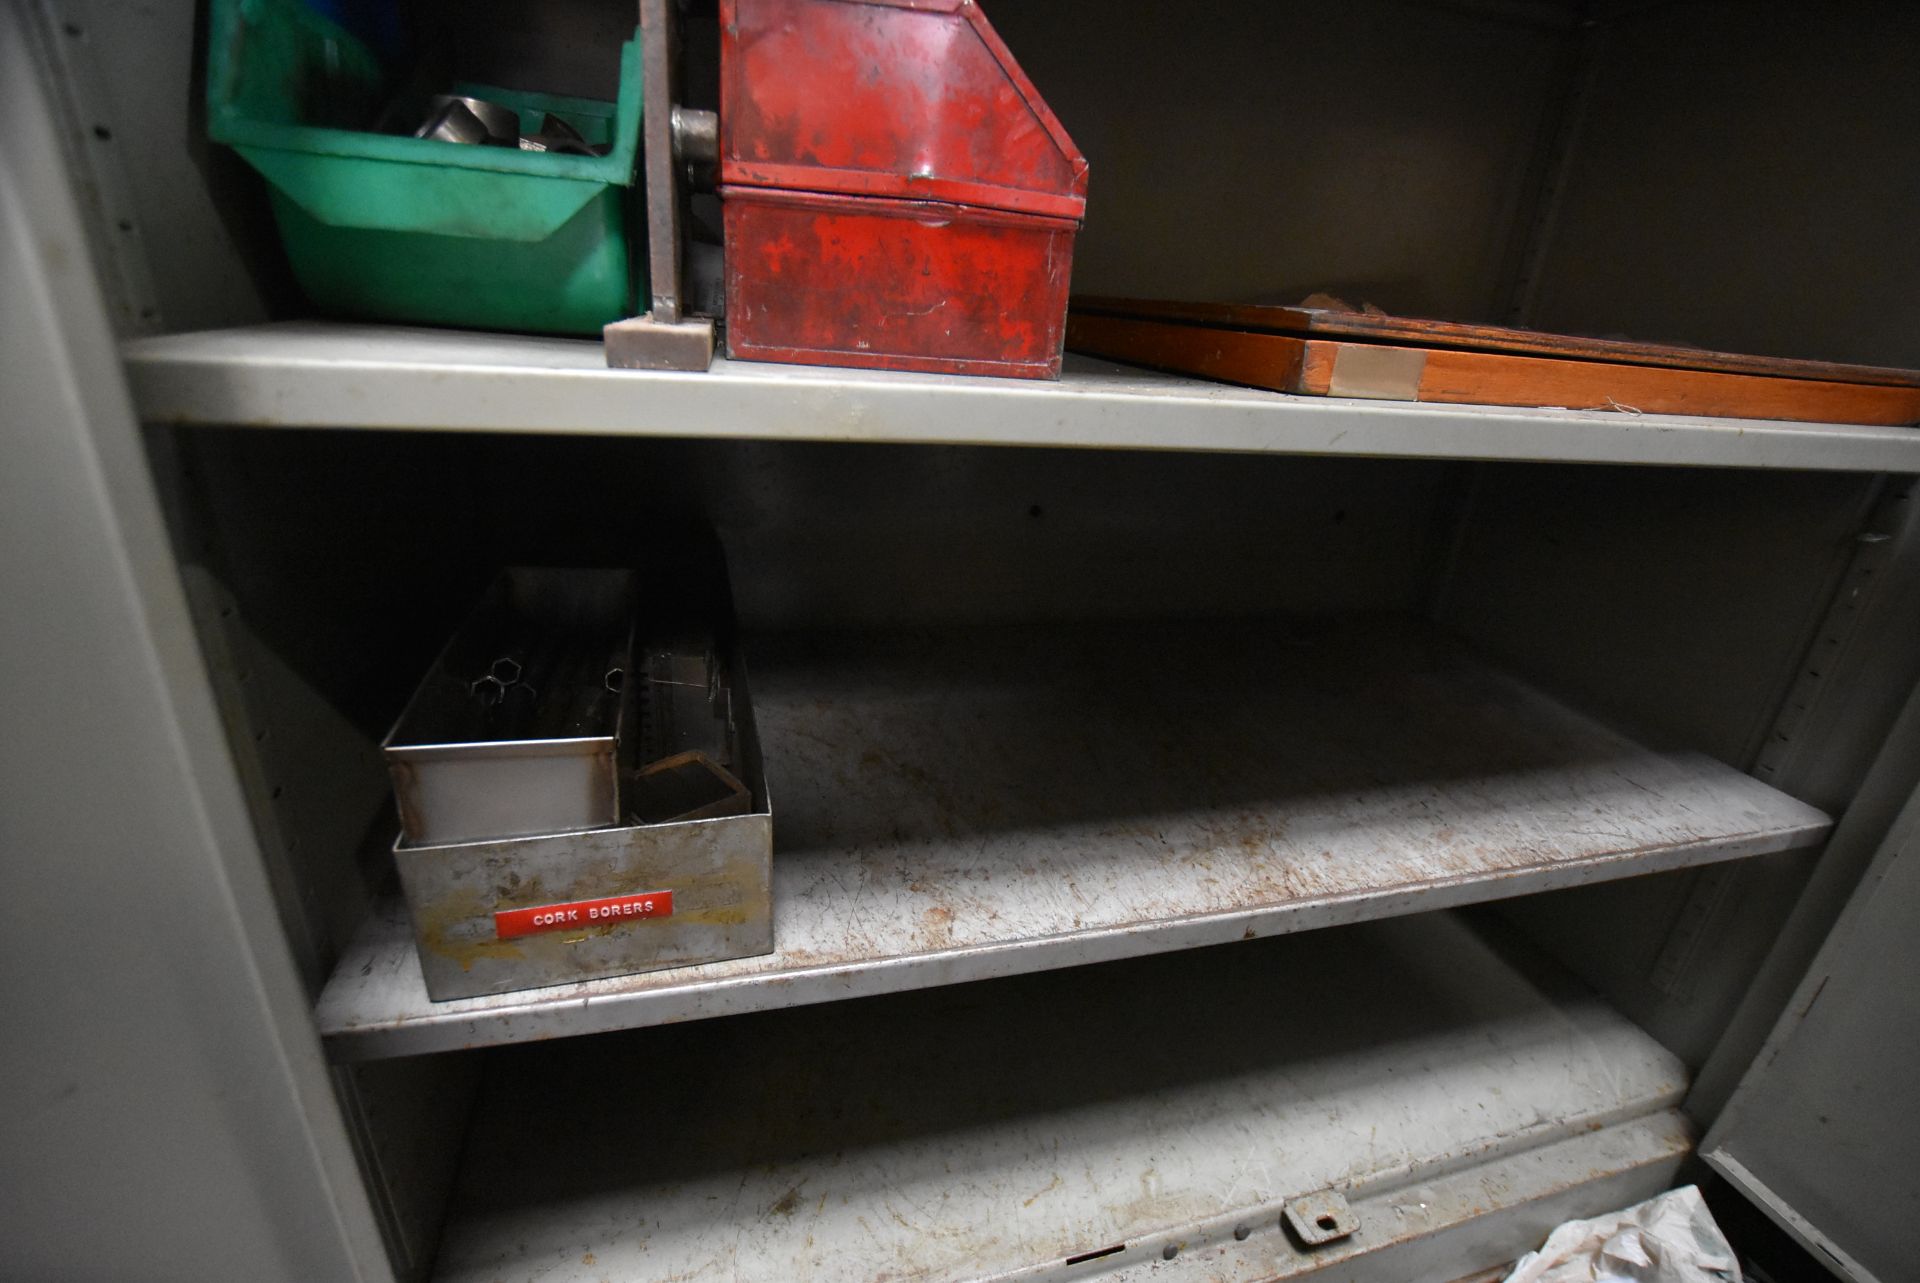 Double Door Steel Cabinet, with contents including inspection equipment, magnetic bases, micrometers - Image 7 of 8